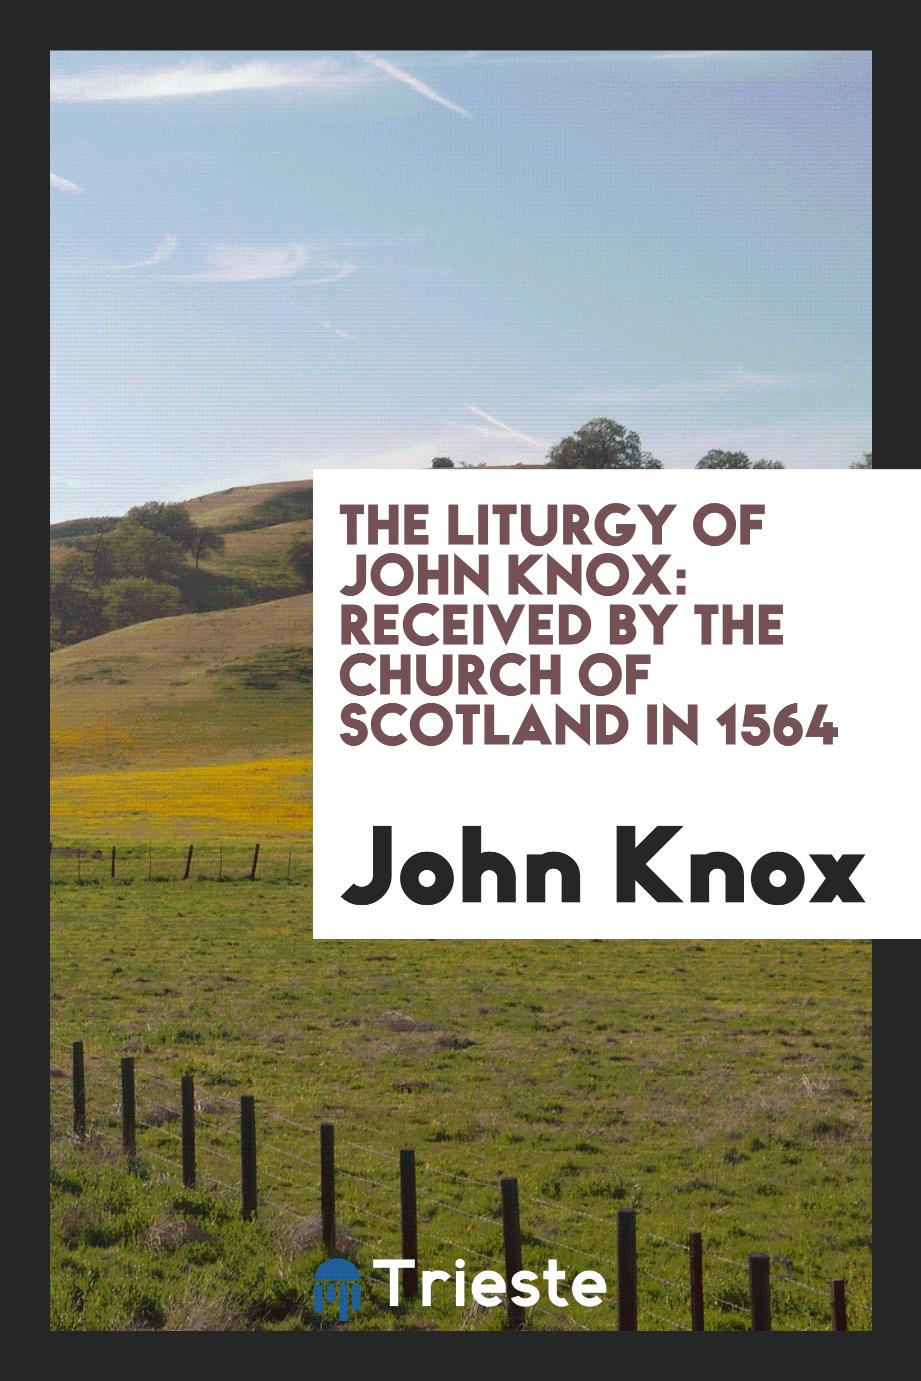 The liturgy of John Knox: received by the Church of Scotland in 1564